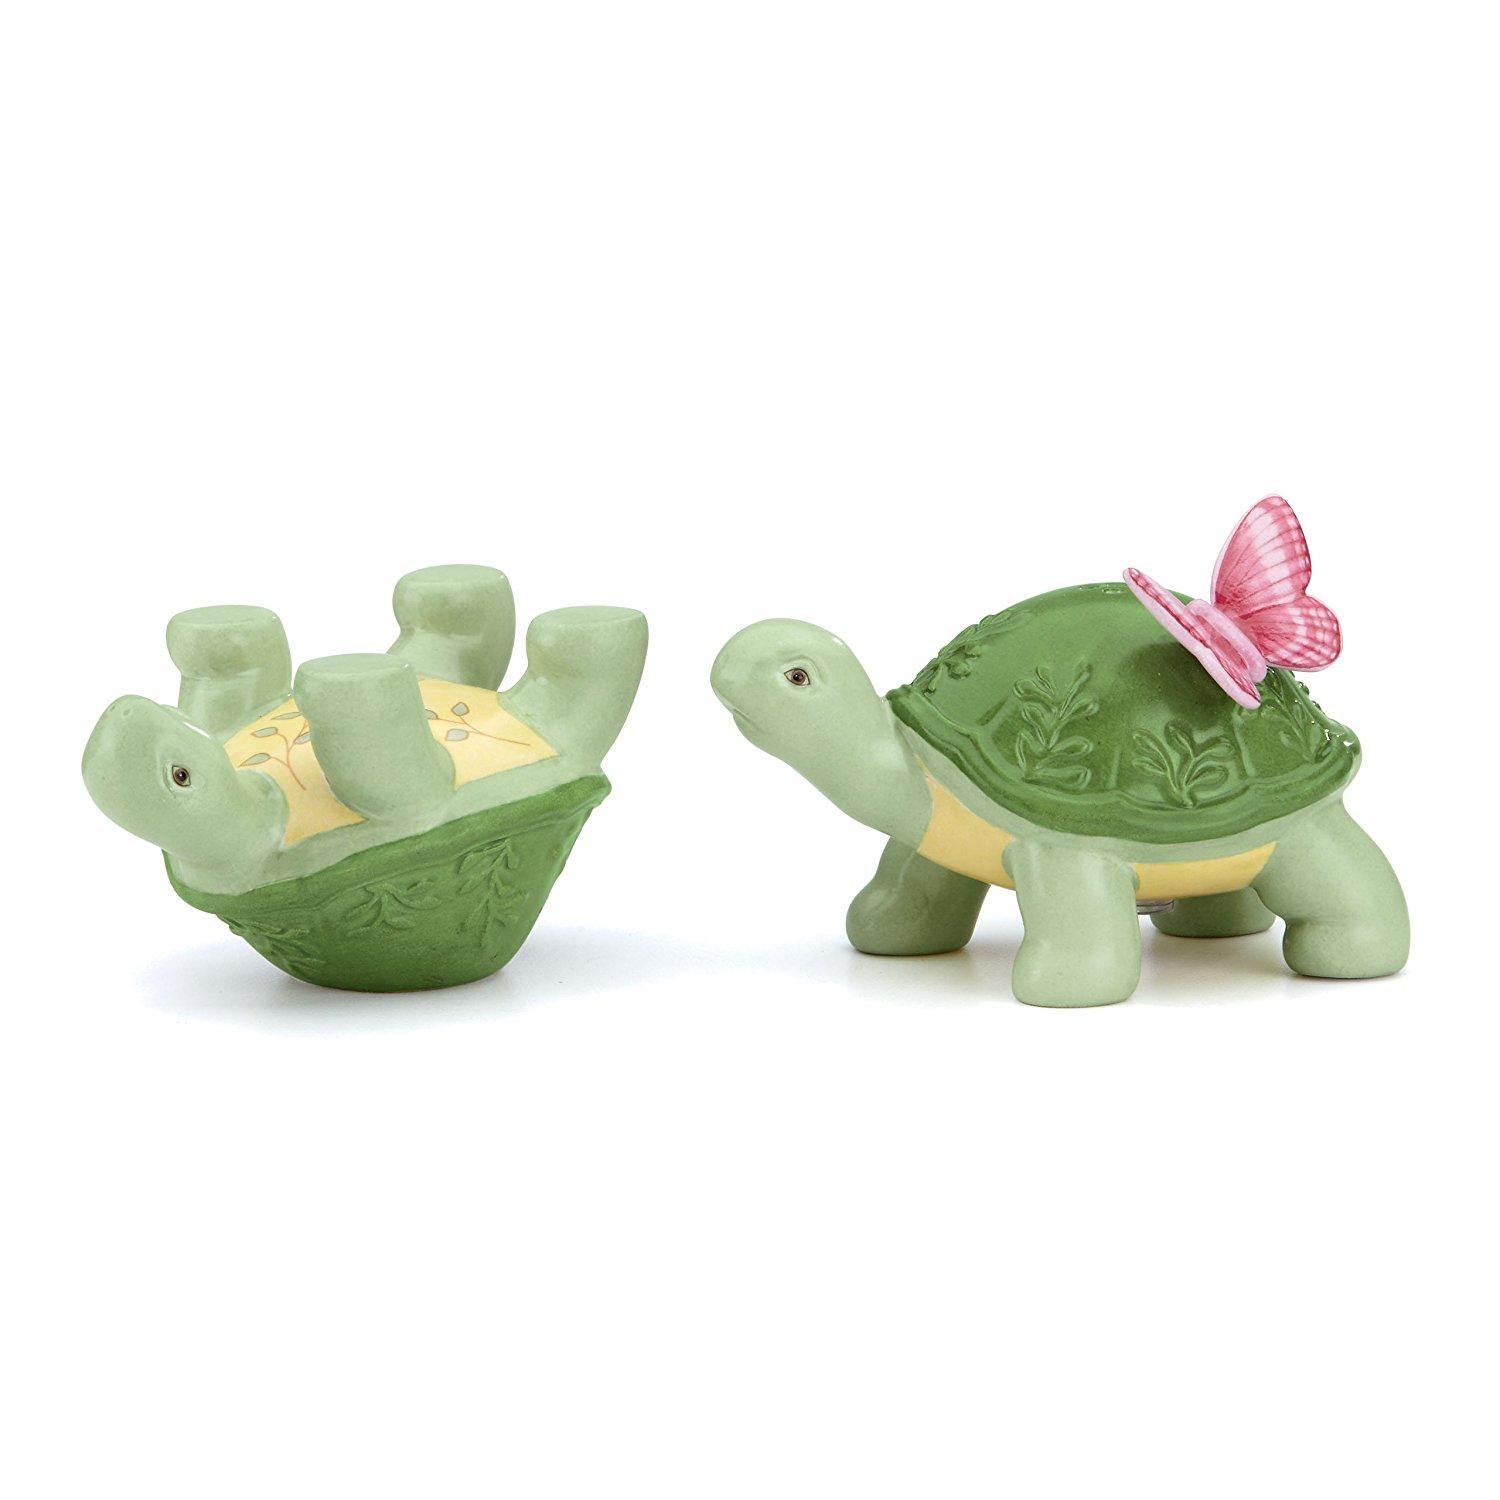 Amazon.com: Lenox Butterfly Meadow Figural Turtle Salt and Pepper ...